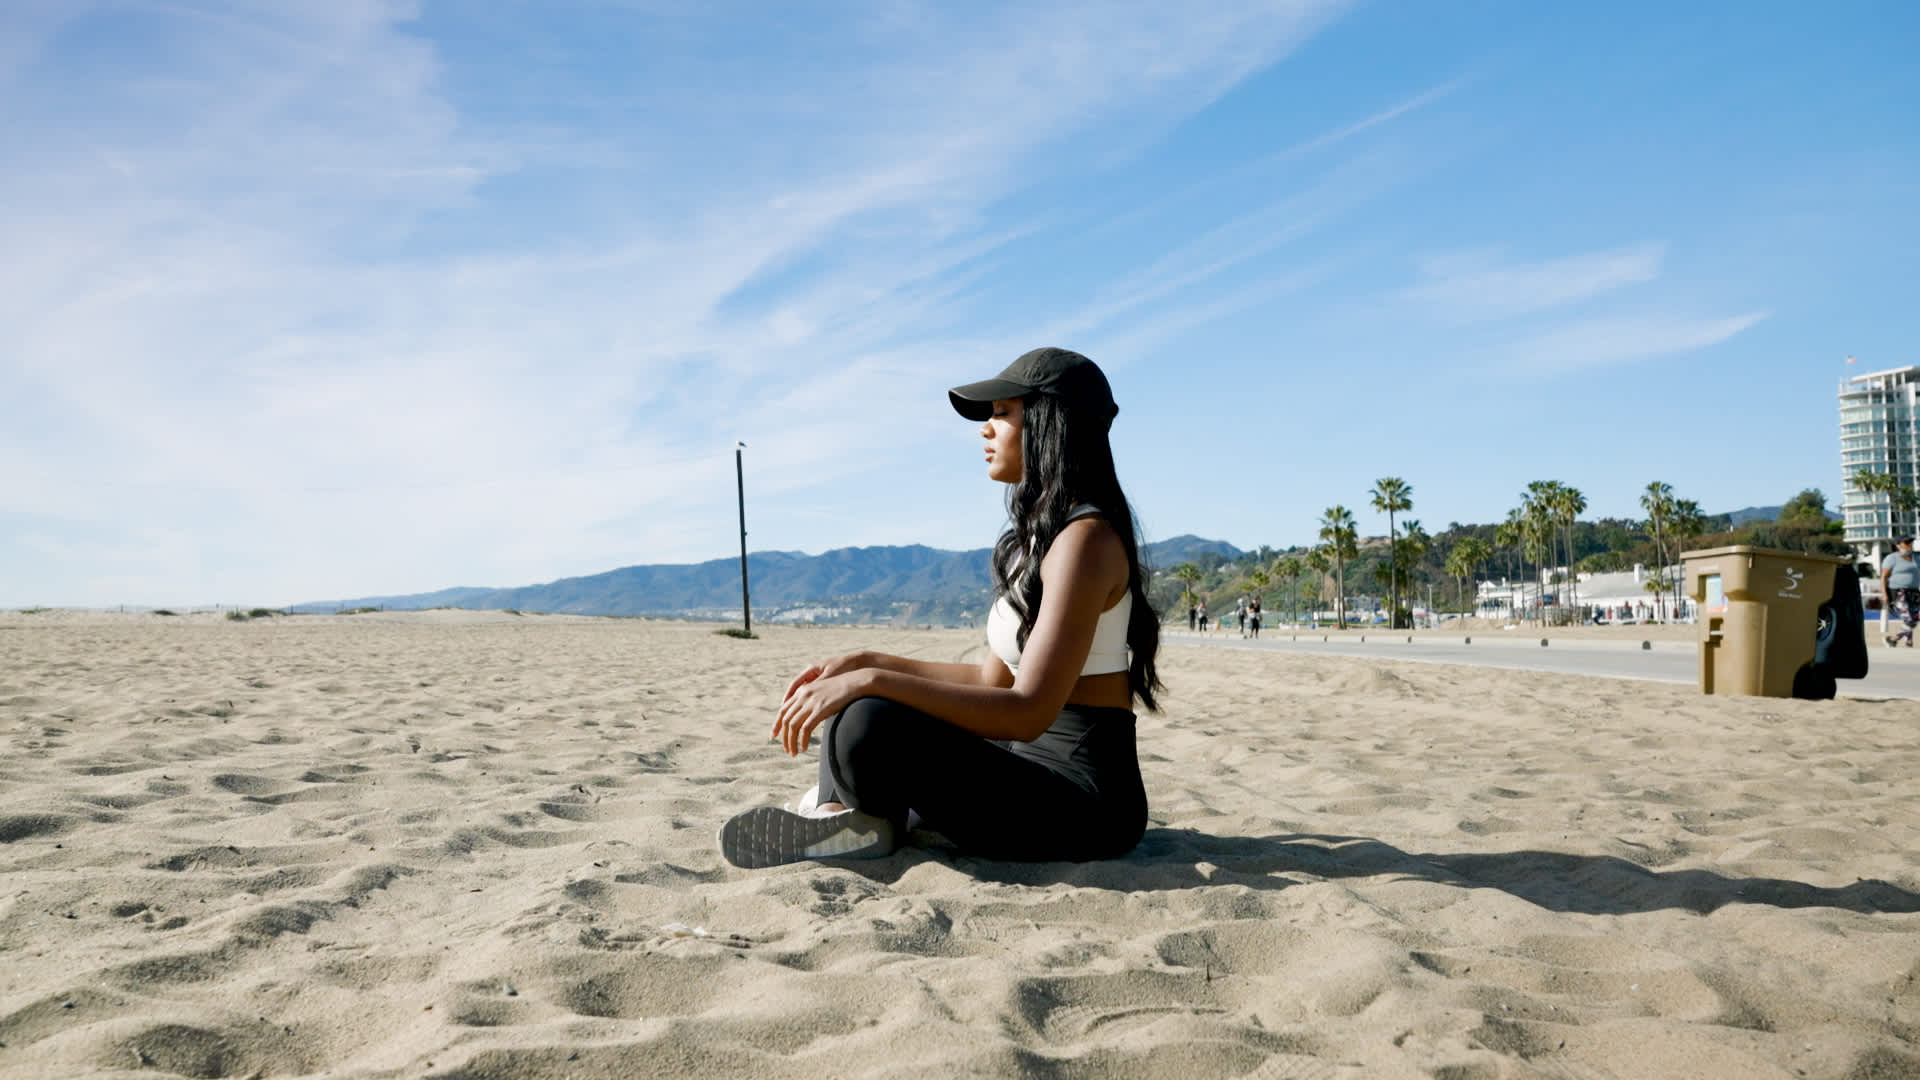 Given her hectic schedule, Lauren Simmons grounds herself through daily meditation.